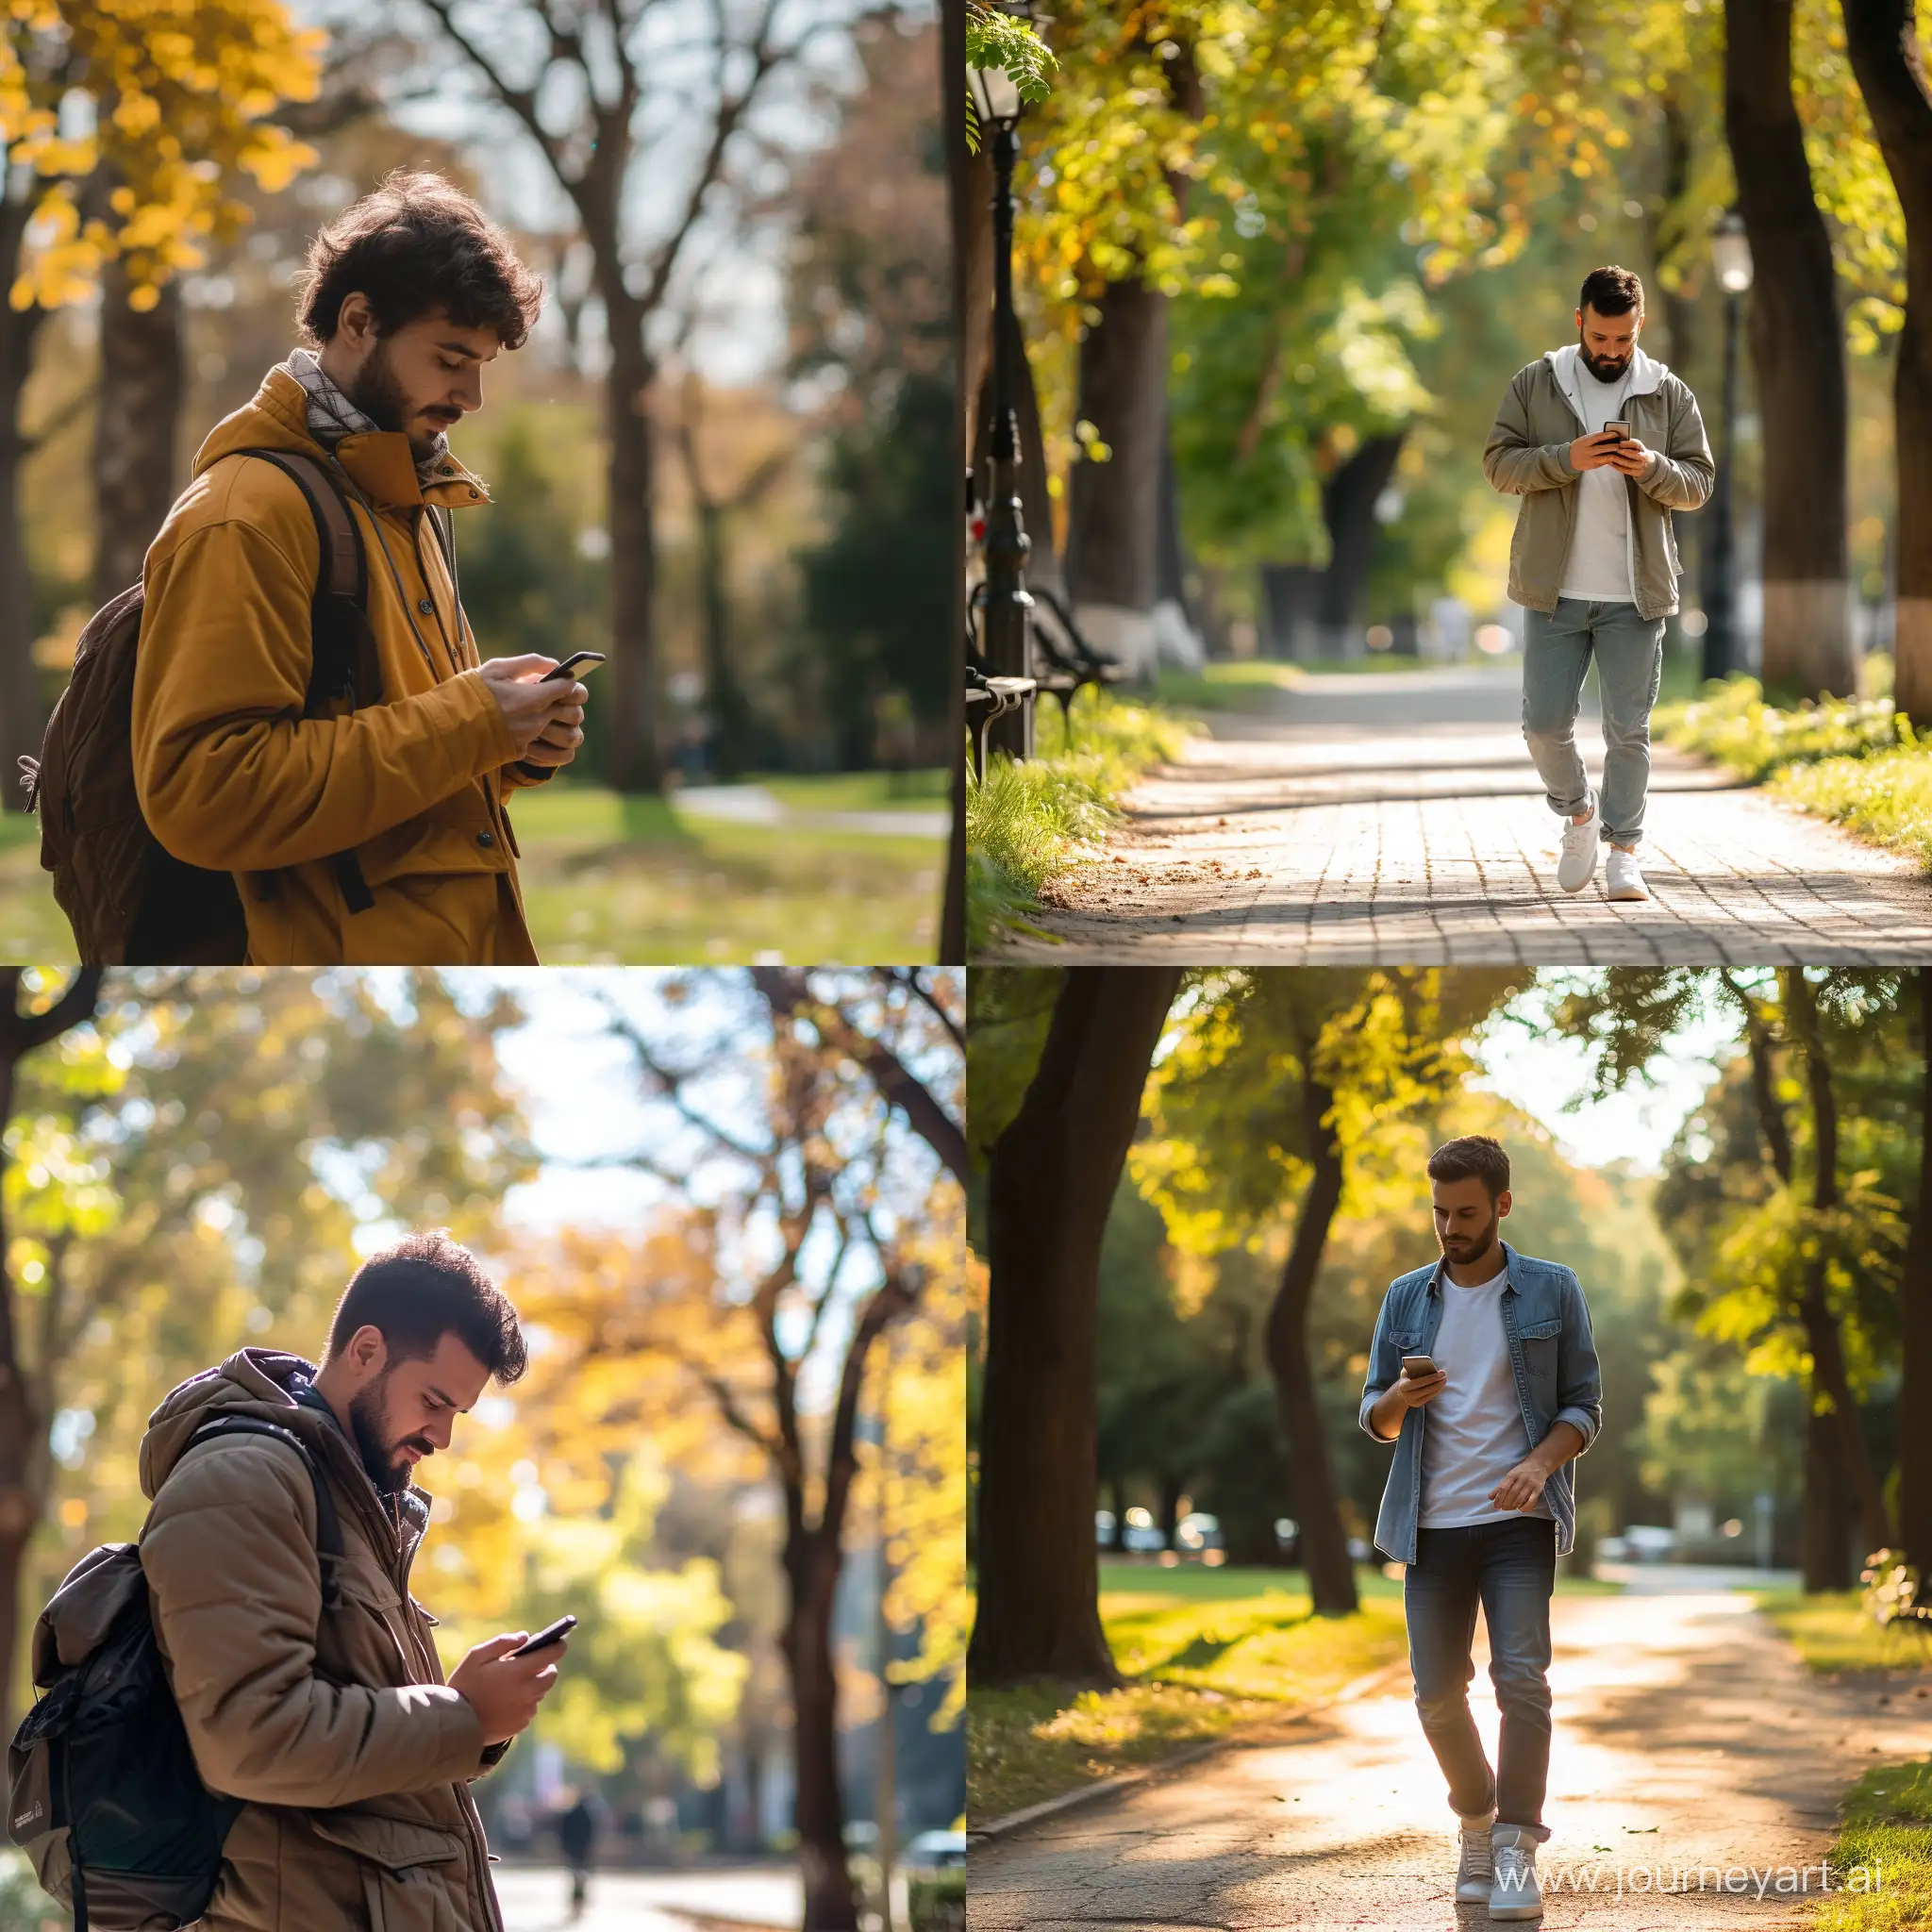 a man using mobile in the park during walking